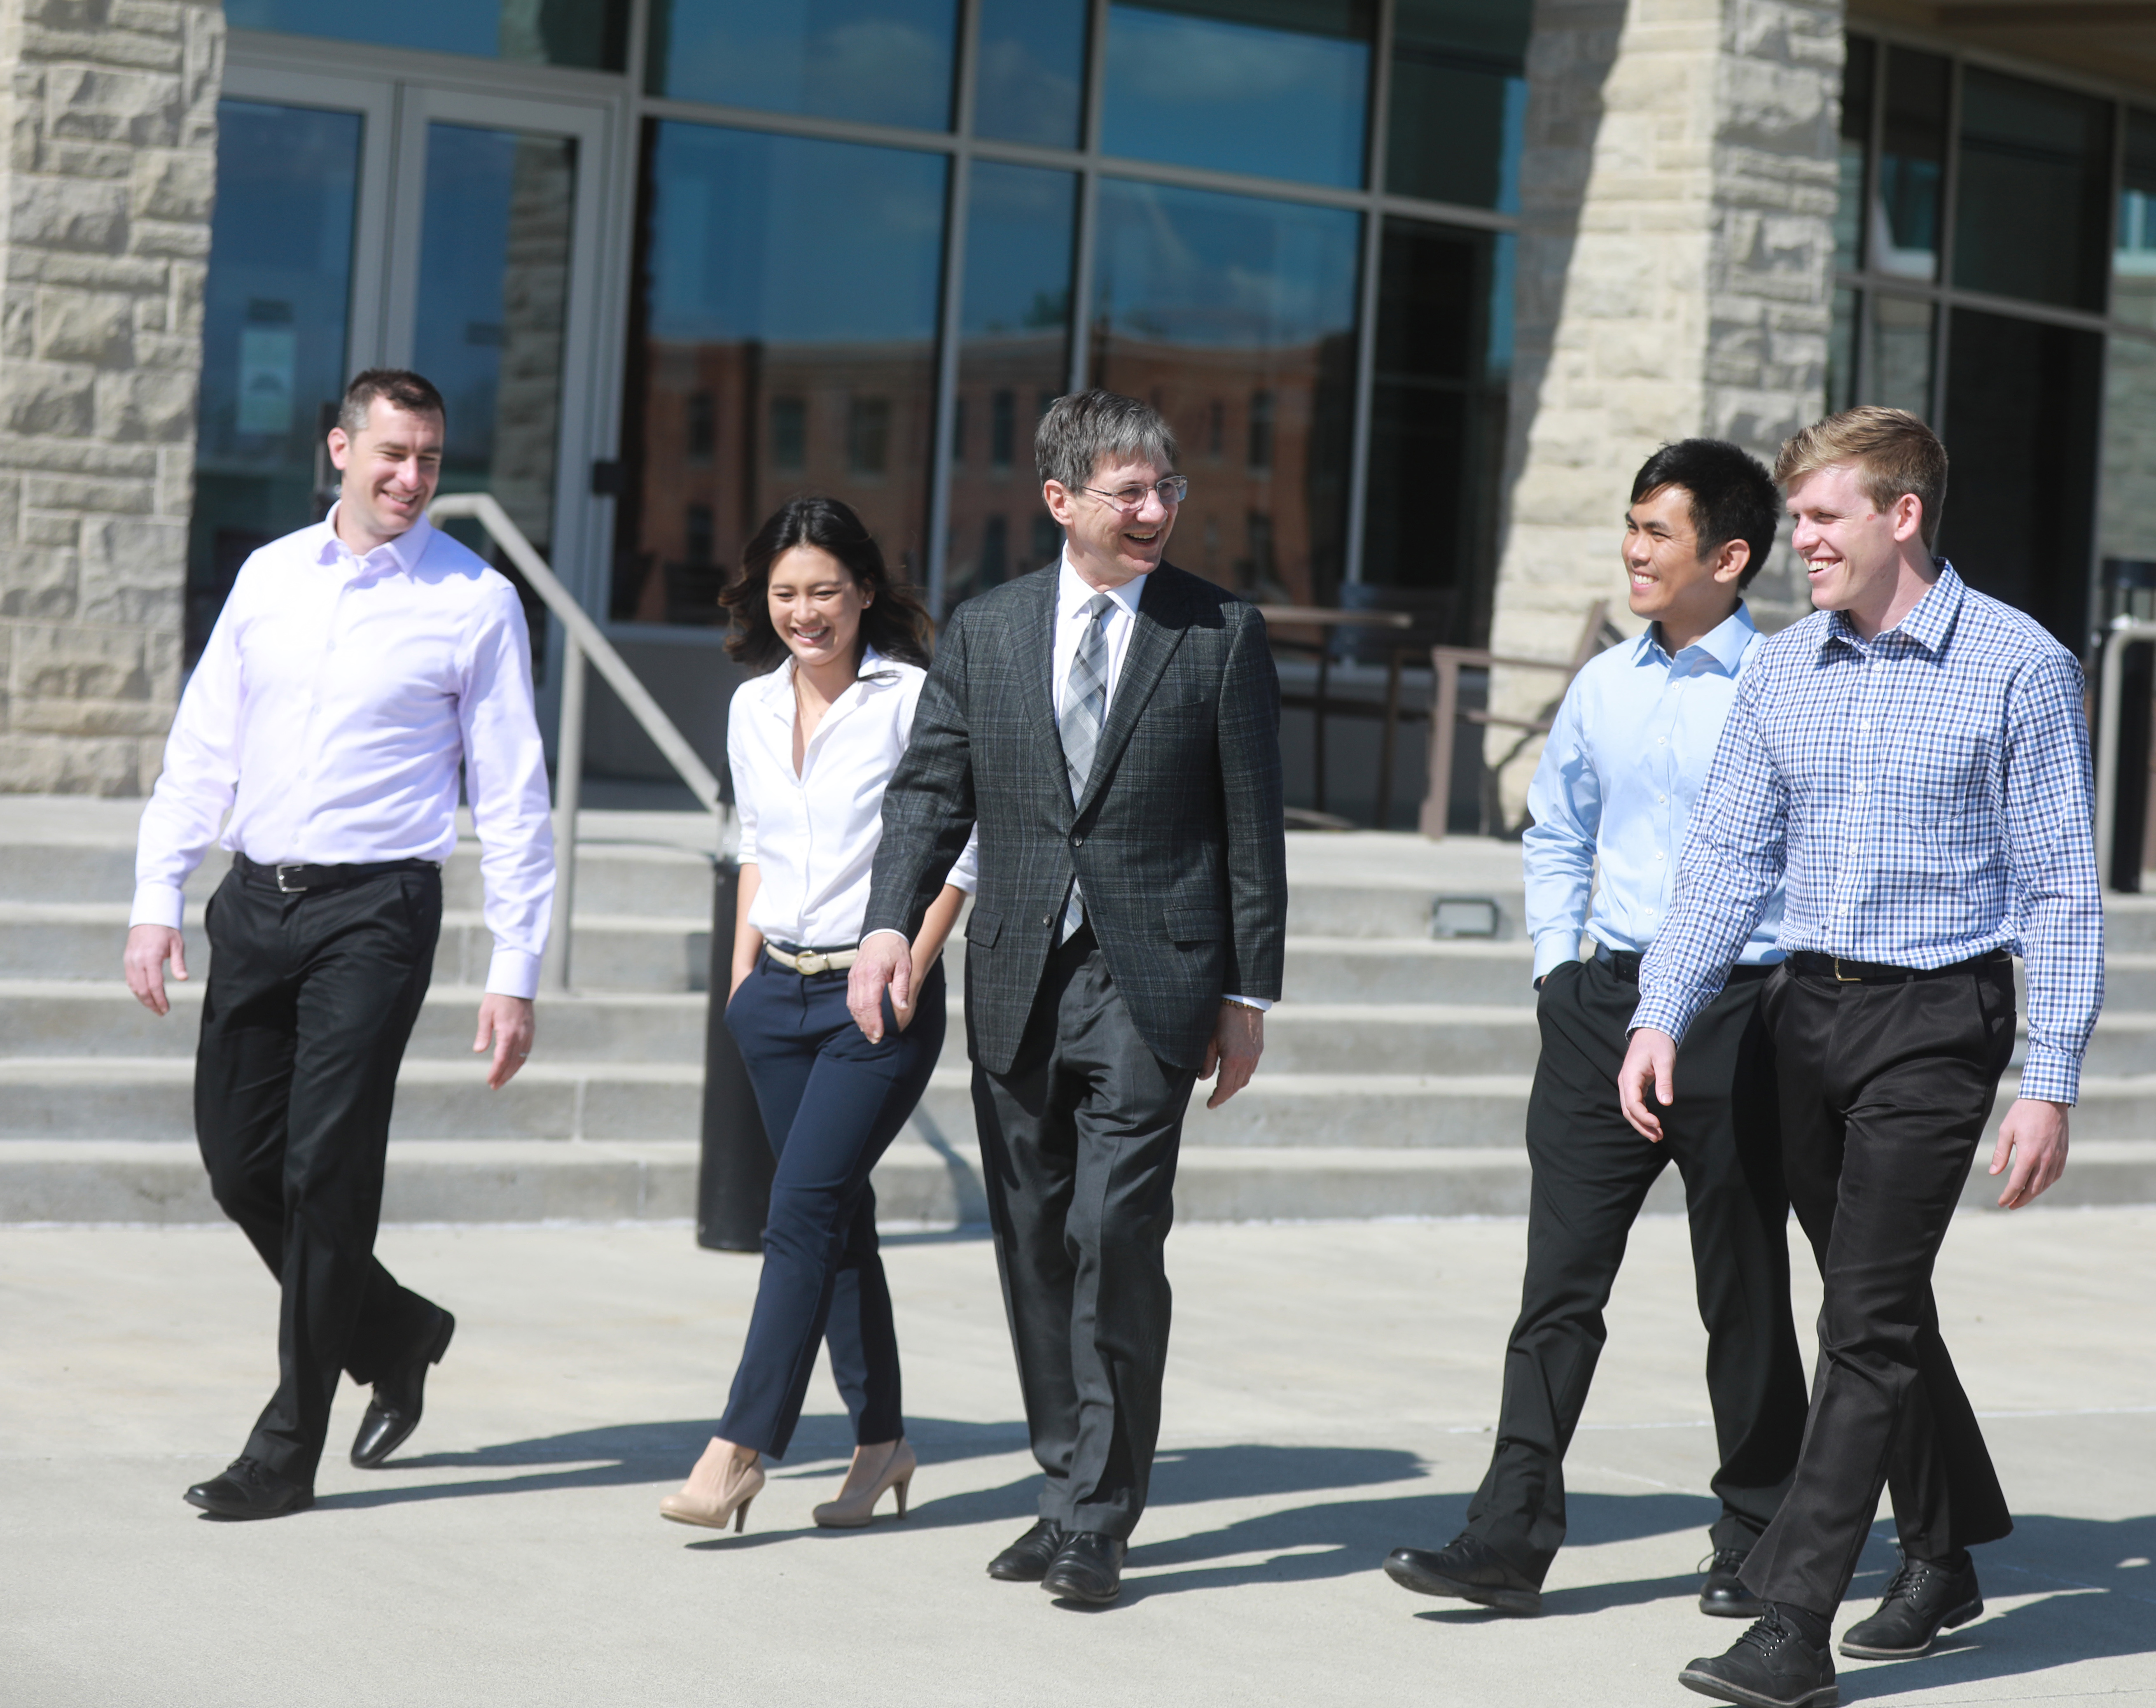 Dr. Nemitz walking on sunny campus day with 4 visitors to campus, two on each side. All appear happy and laughing/smiling.